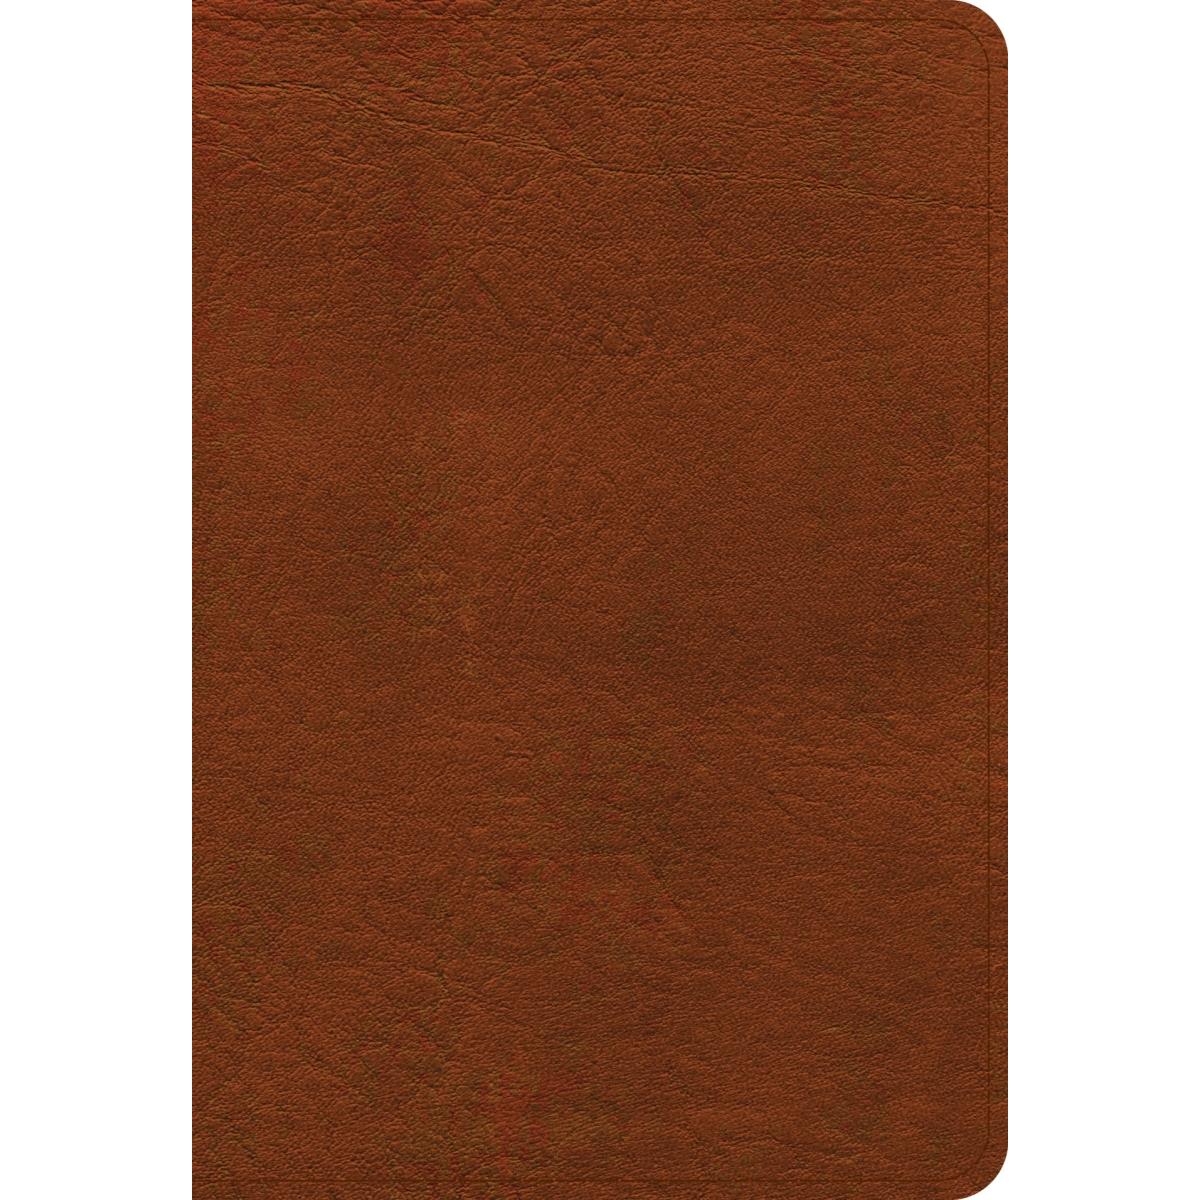 Picture of B&H Publishing 259626 NASB 2020 Large Print Compact Reference Leathertouch Bible - Burnt Sienna